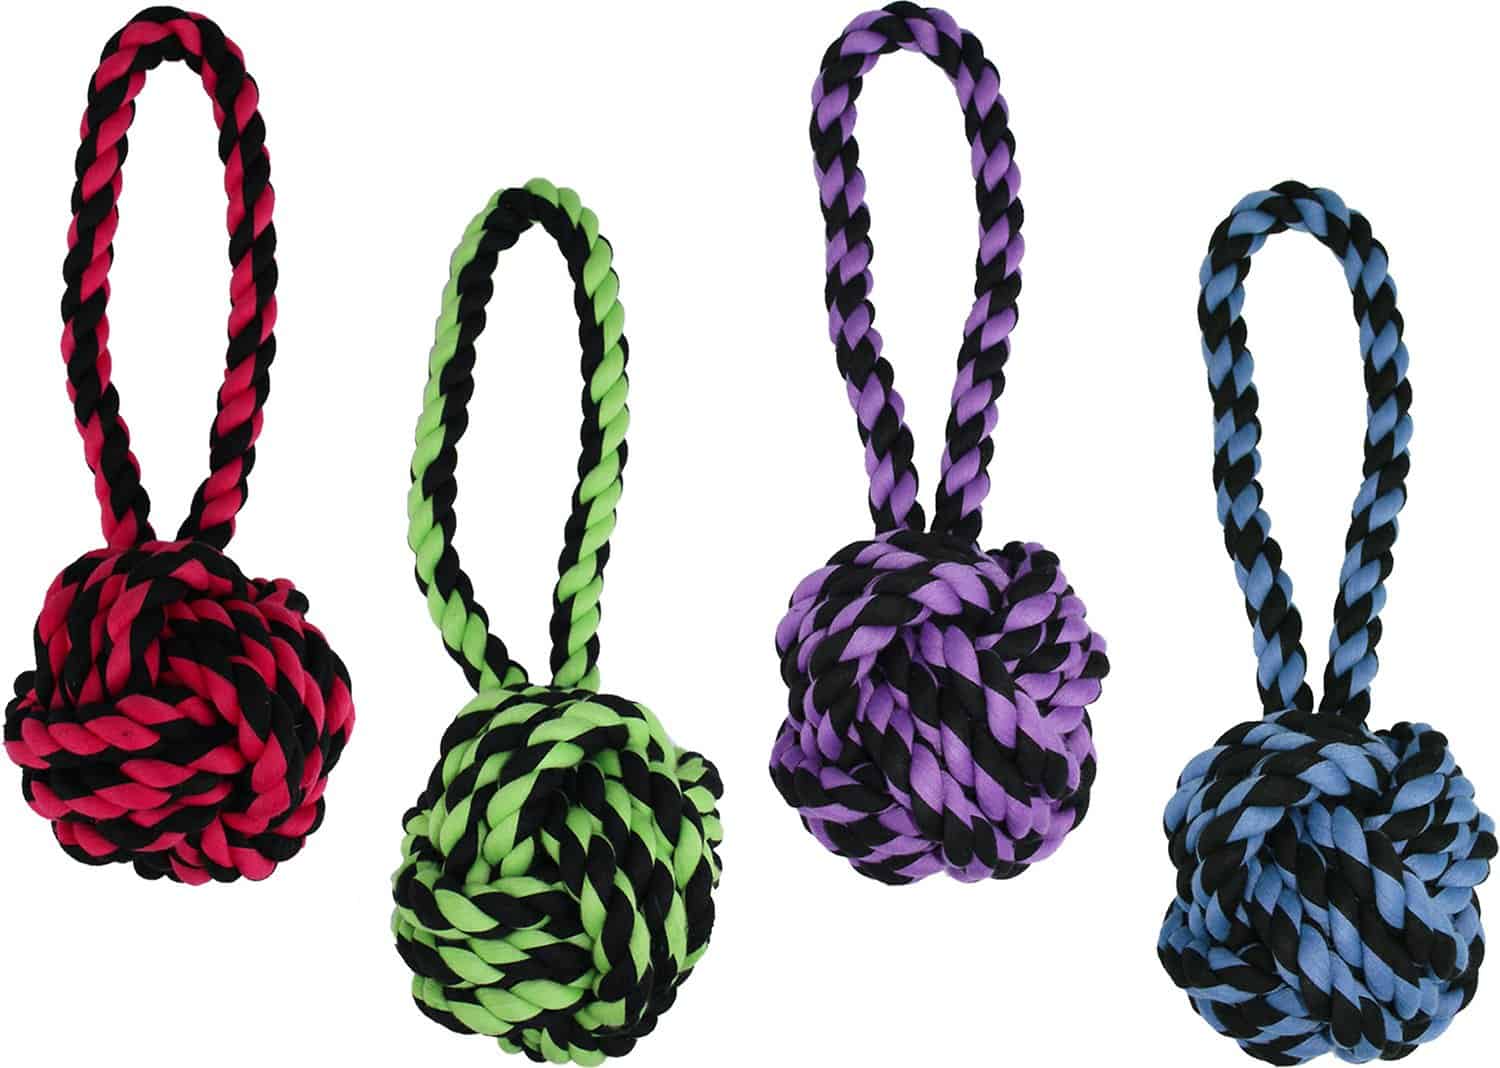 Multipets' Tug Rope Toy